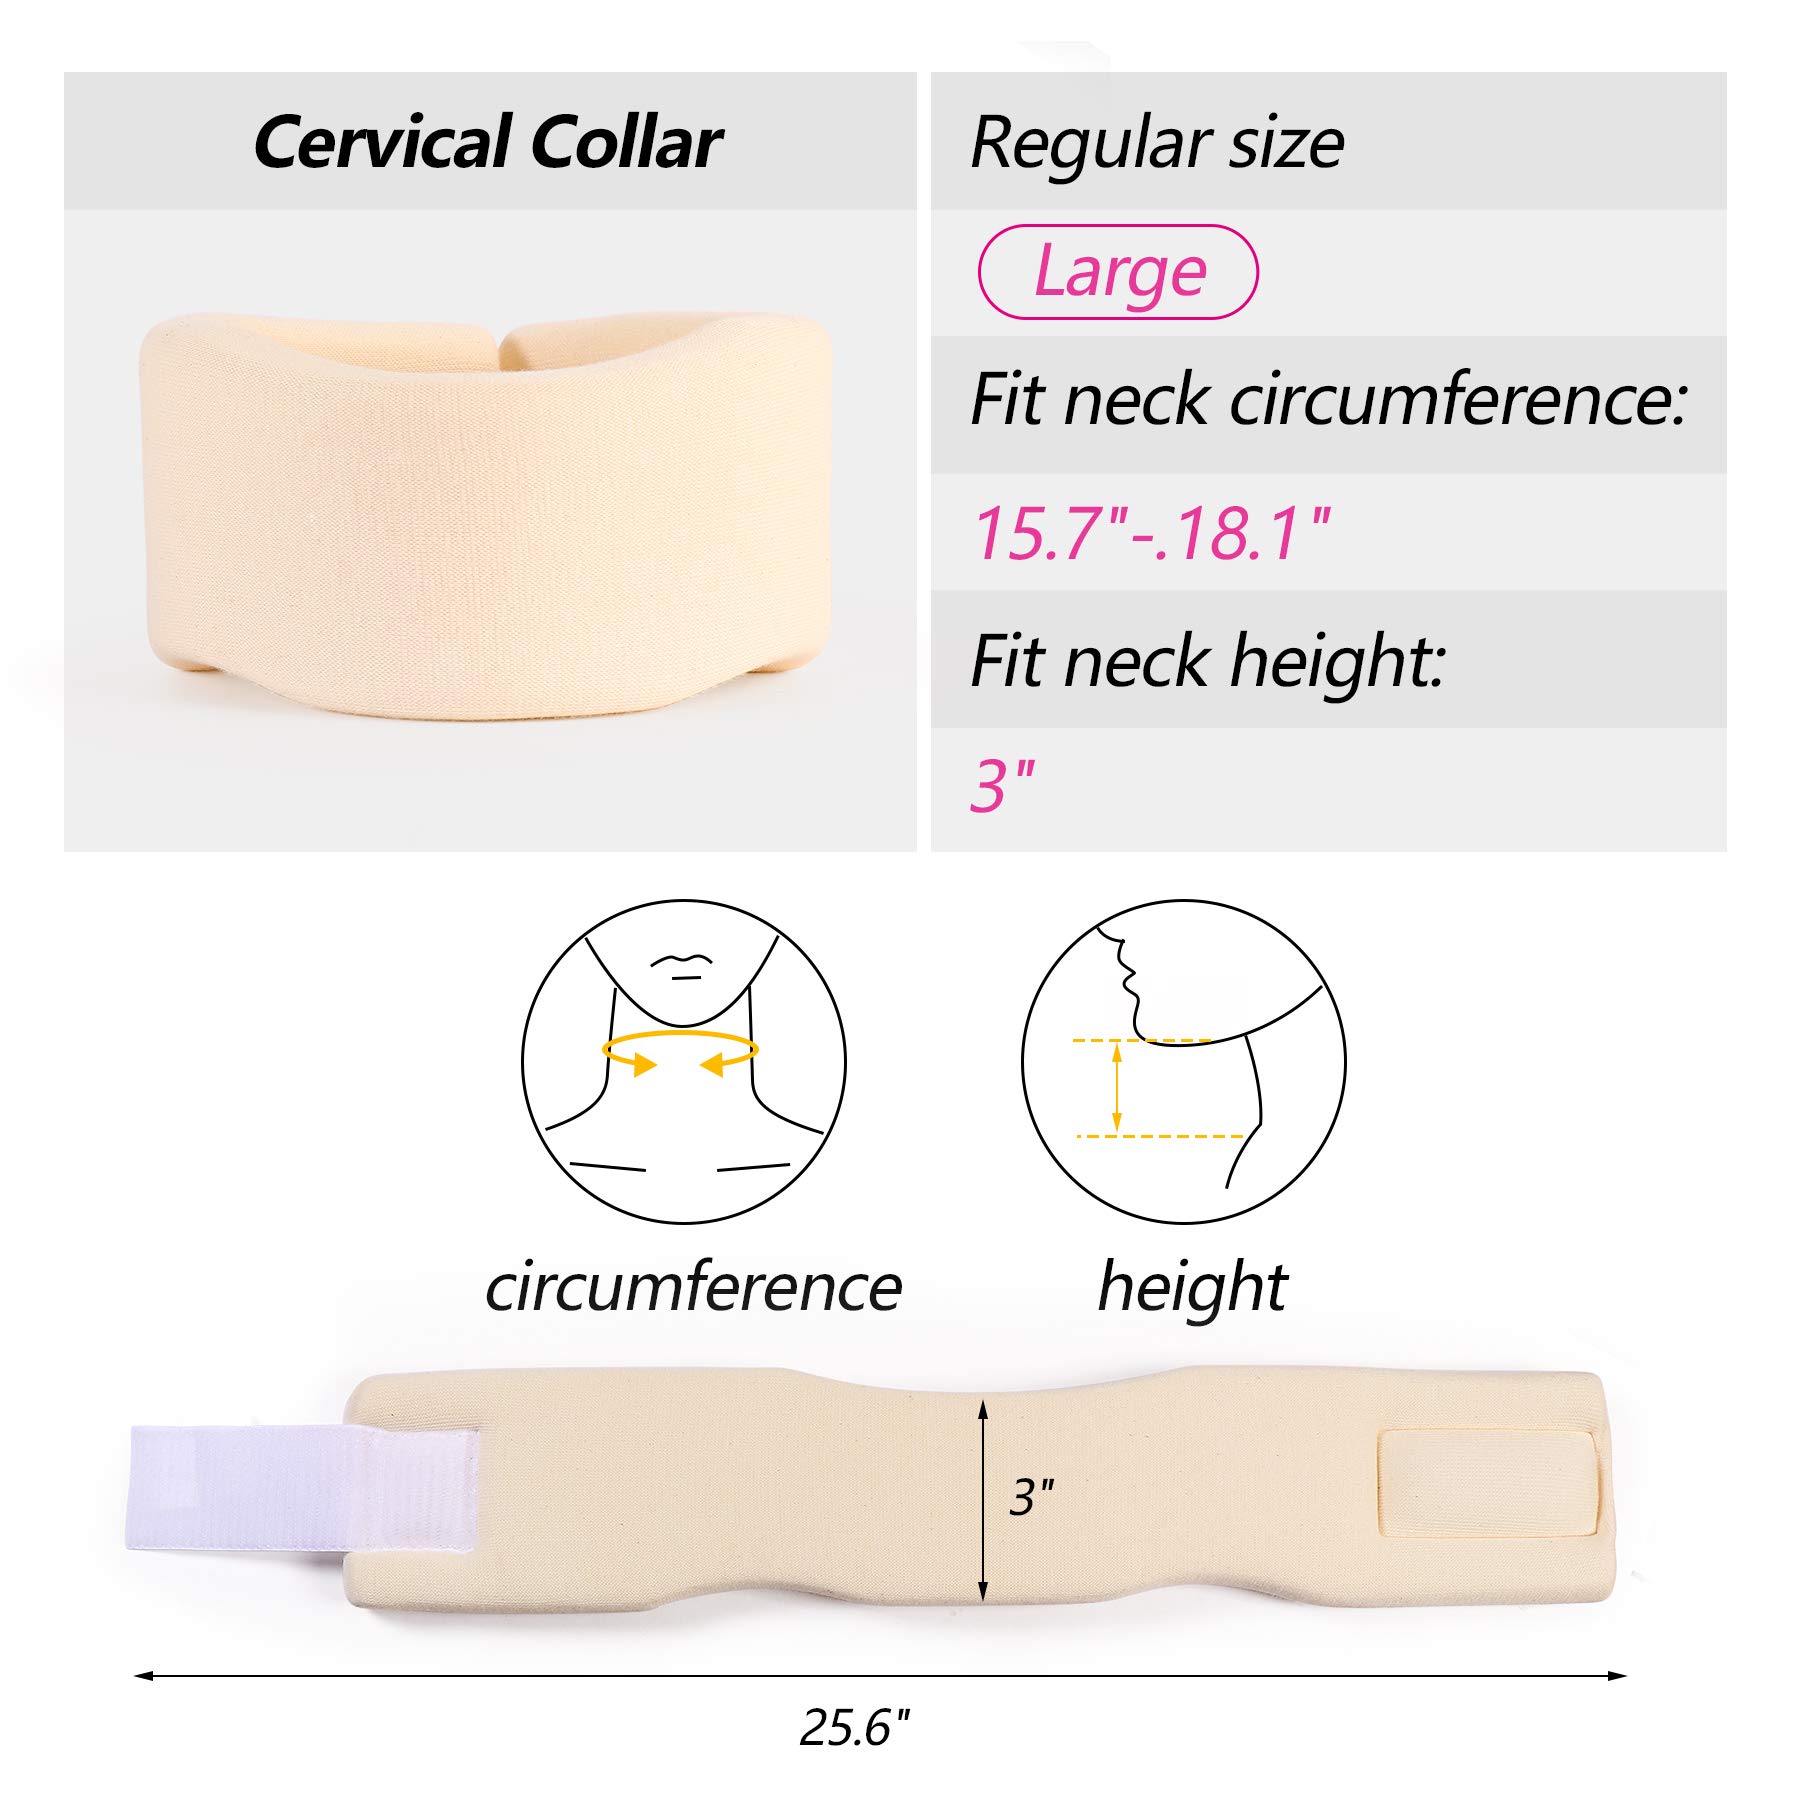 Soft Foam Neck Brace Universal Cervical Collar, Adjustable Support Brace for Sleeping - Relieves Pain and Spine Pressure, Neck Collar After Whiplash or Injury (3